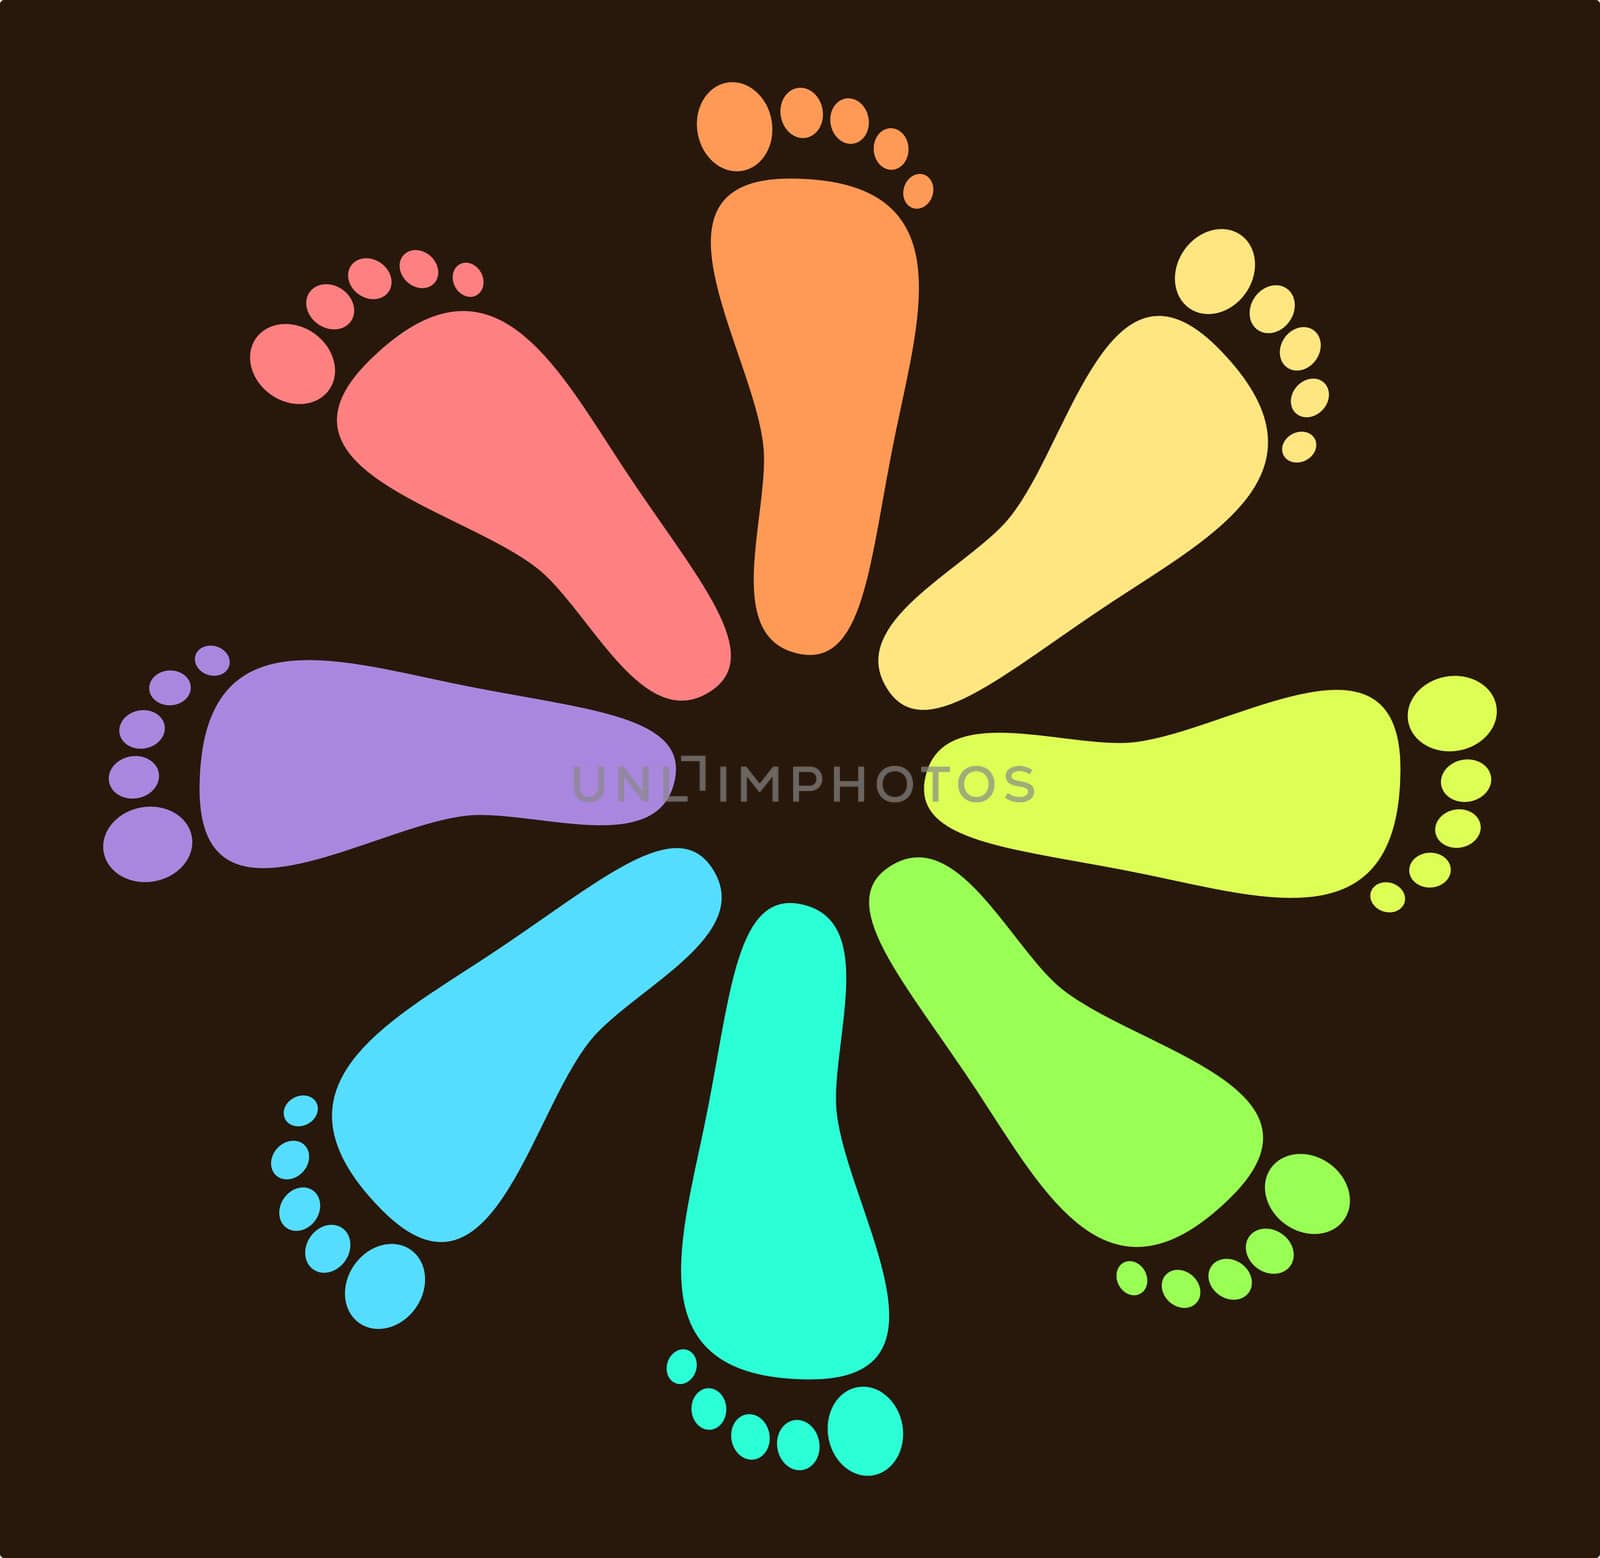 Colored Footprint Design by RichieThakur